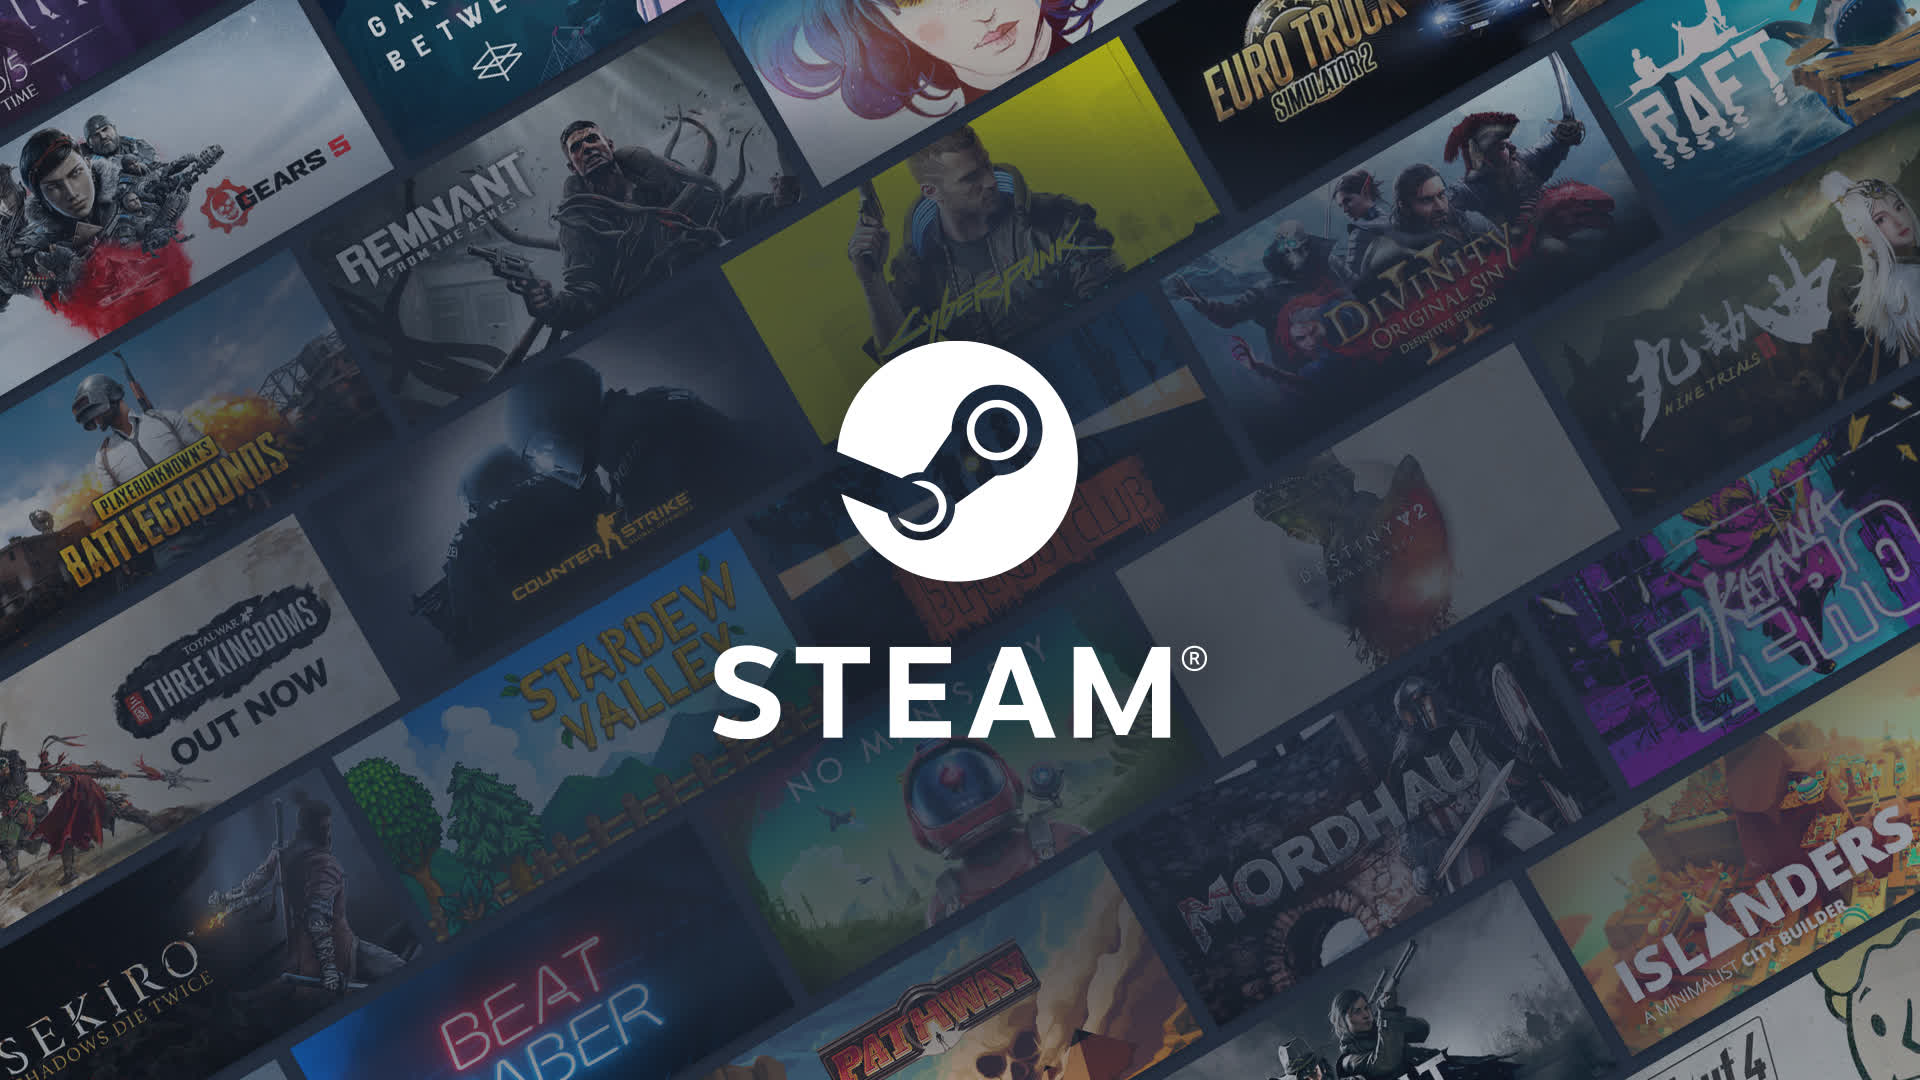 Apple demands sales data for hundreds of Steam games as part of its legal battle with Epic